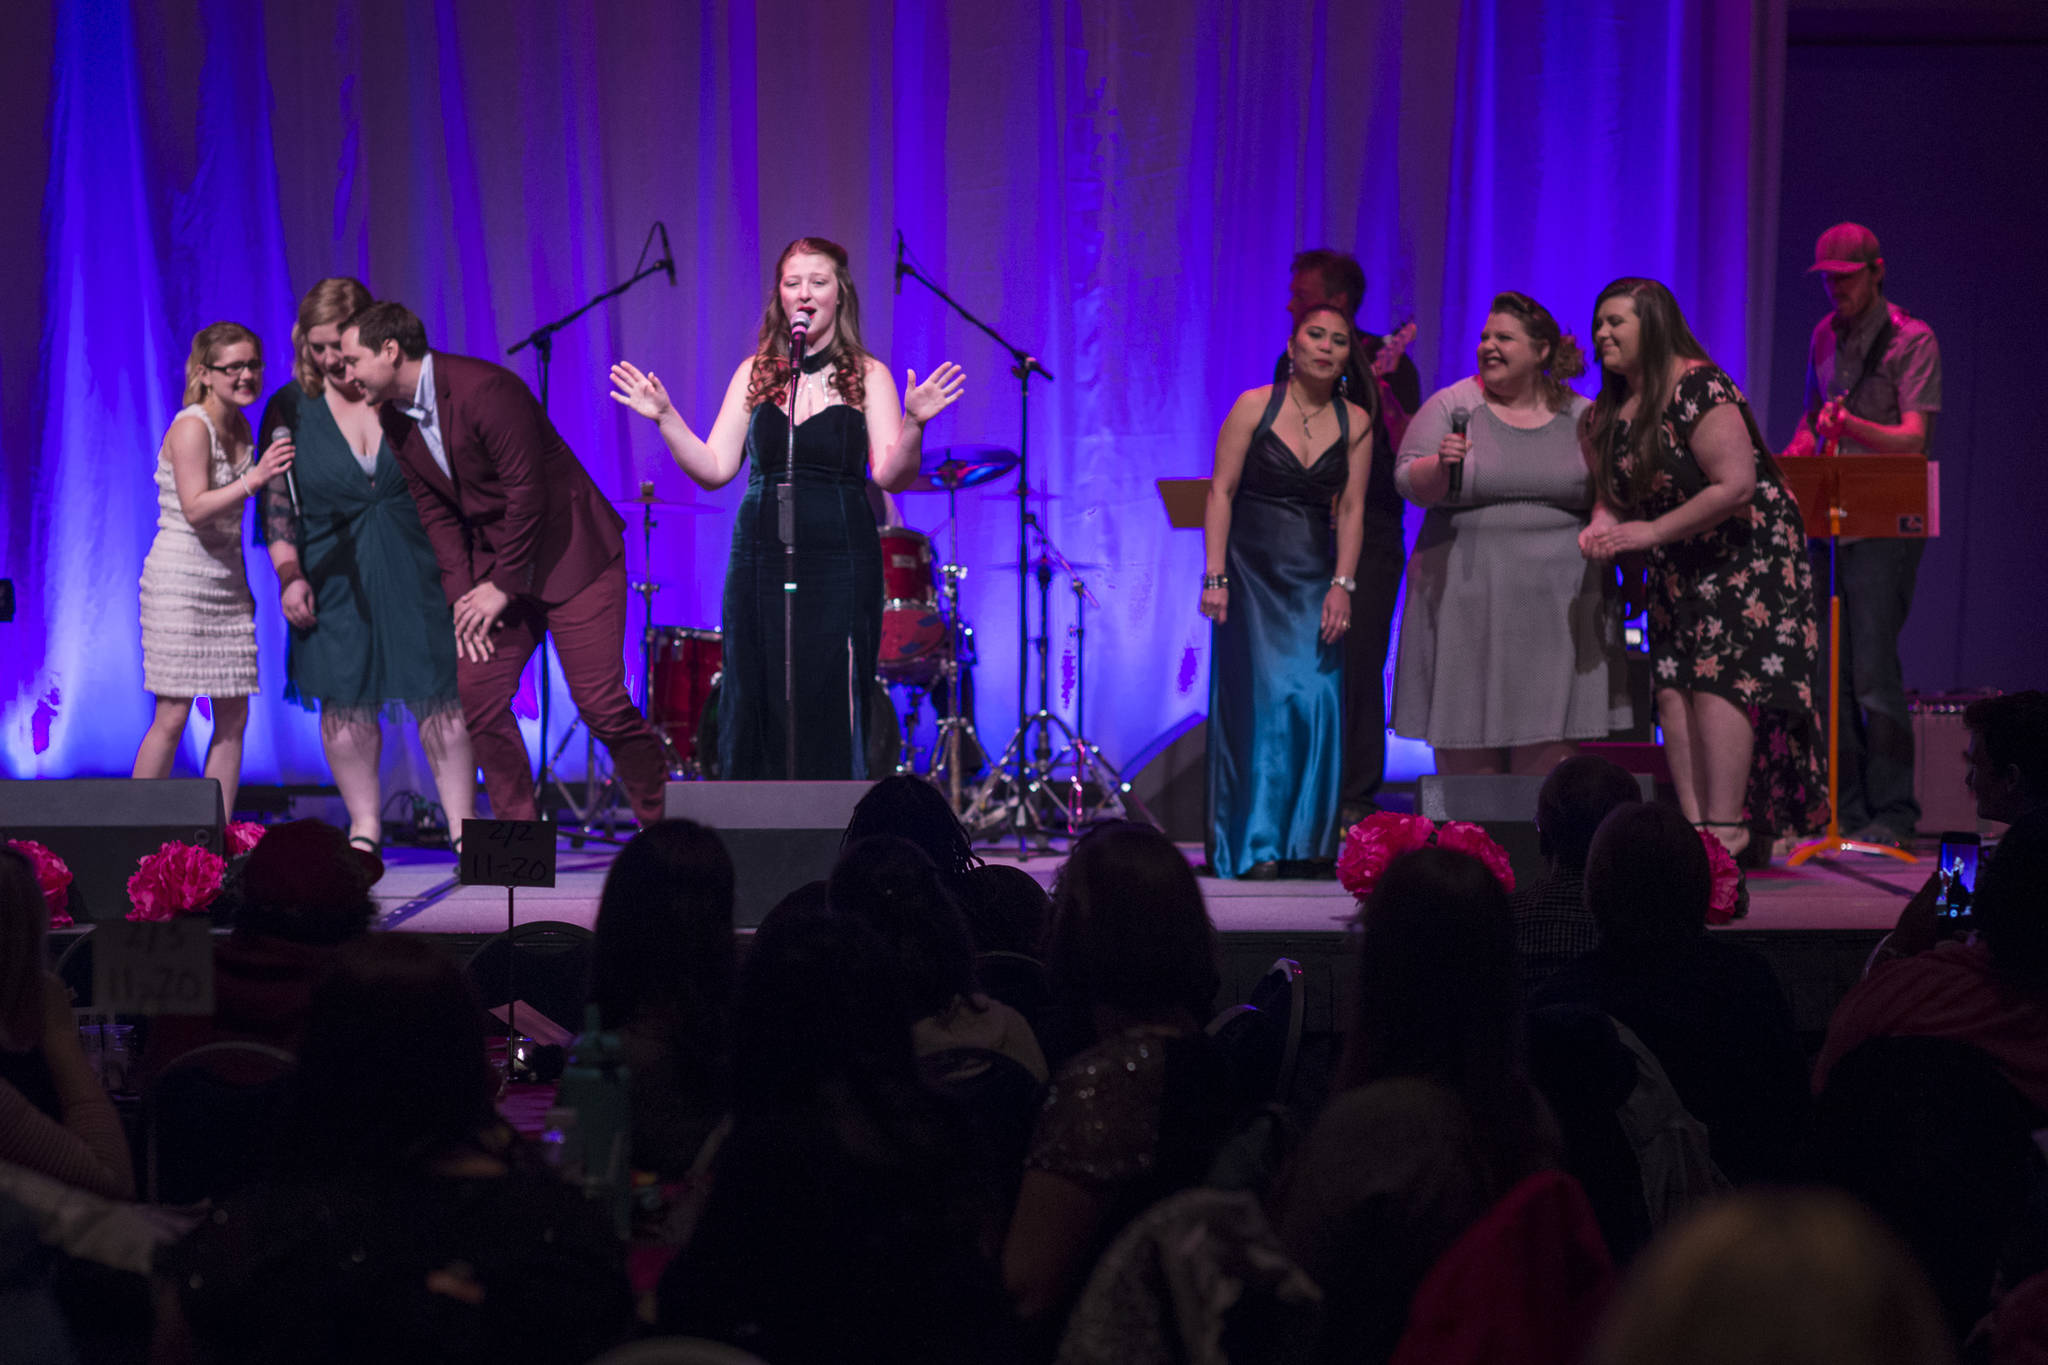 Contestants sing an opening number at Juneau Lyric Opera’s production of “Who’s Your Diva?” at Centennial Hall on Saturday, Sept. 29, 2018. (Michael Penn | Juneau Empire)